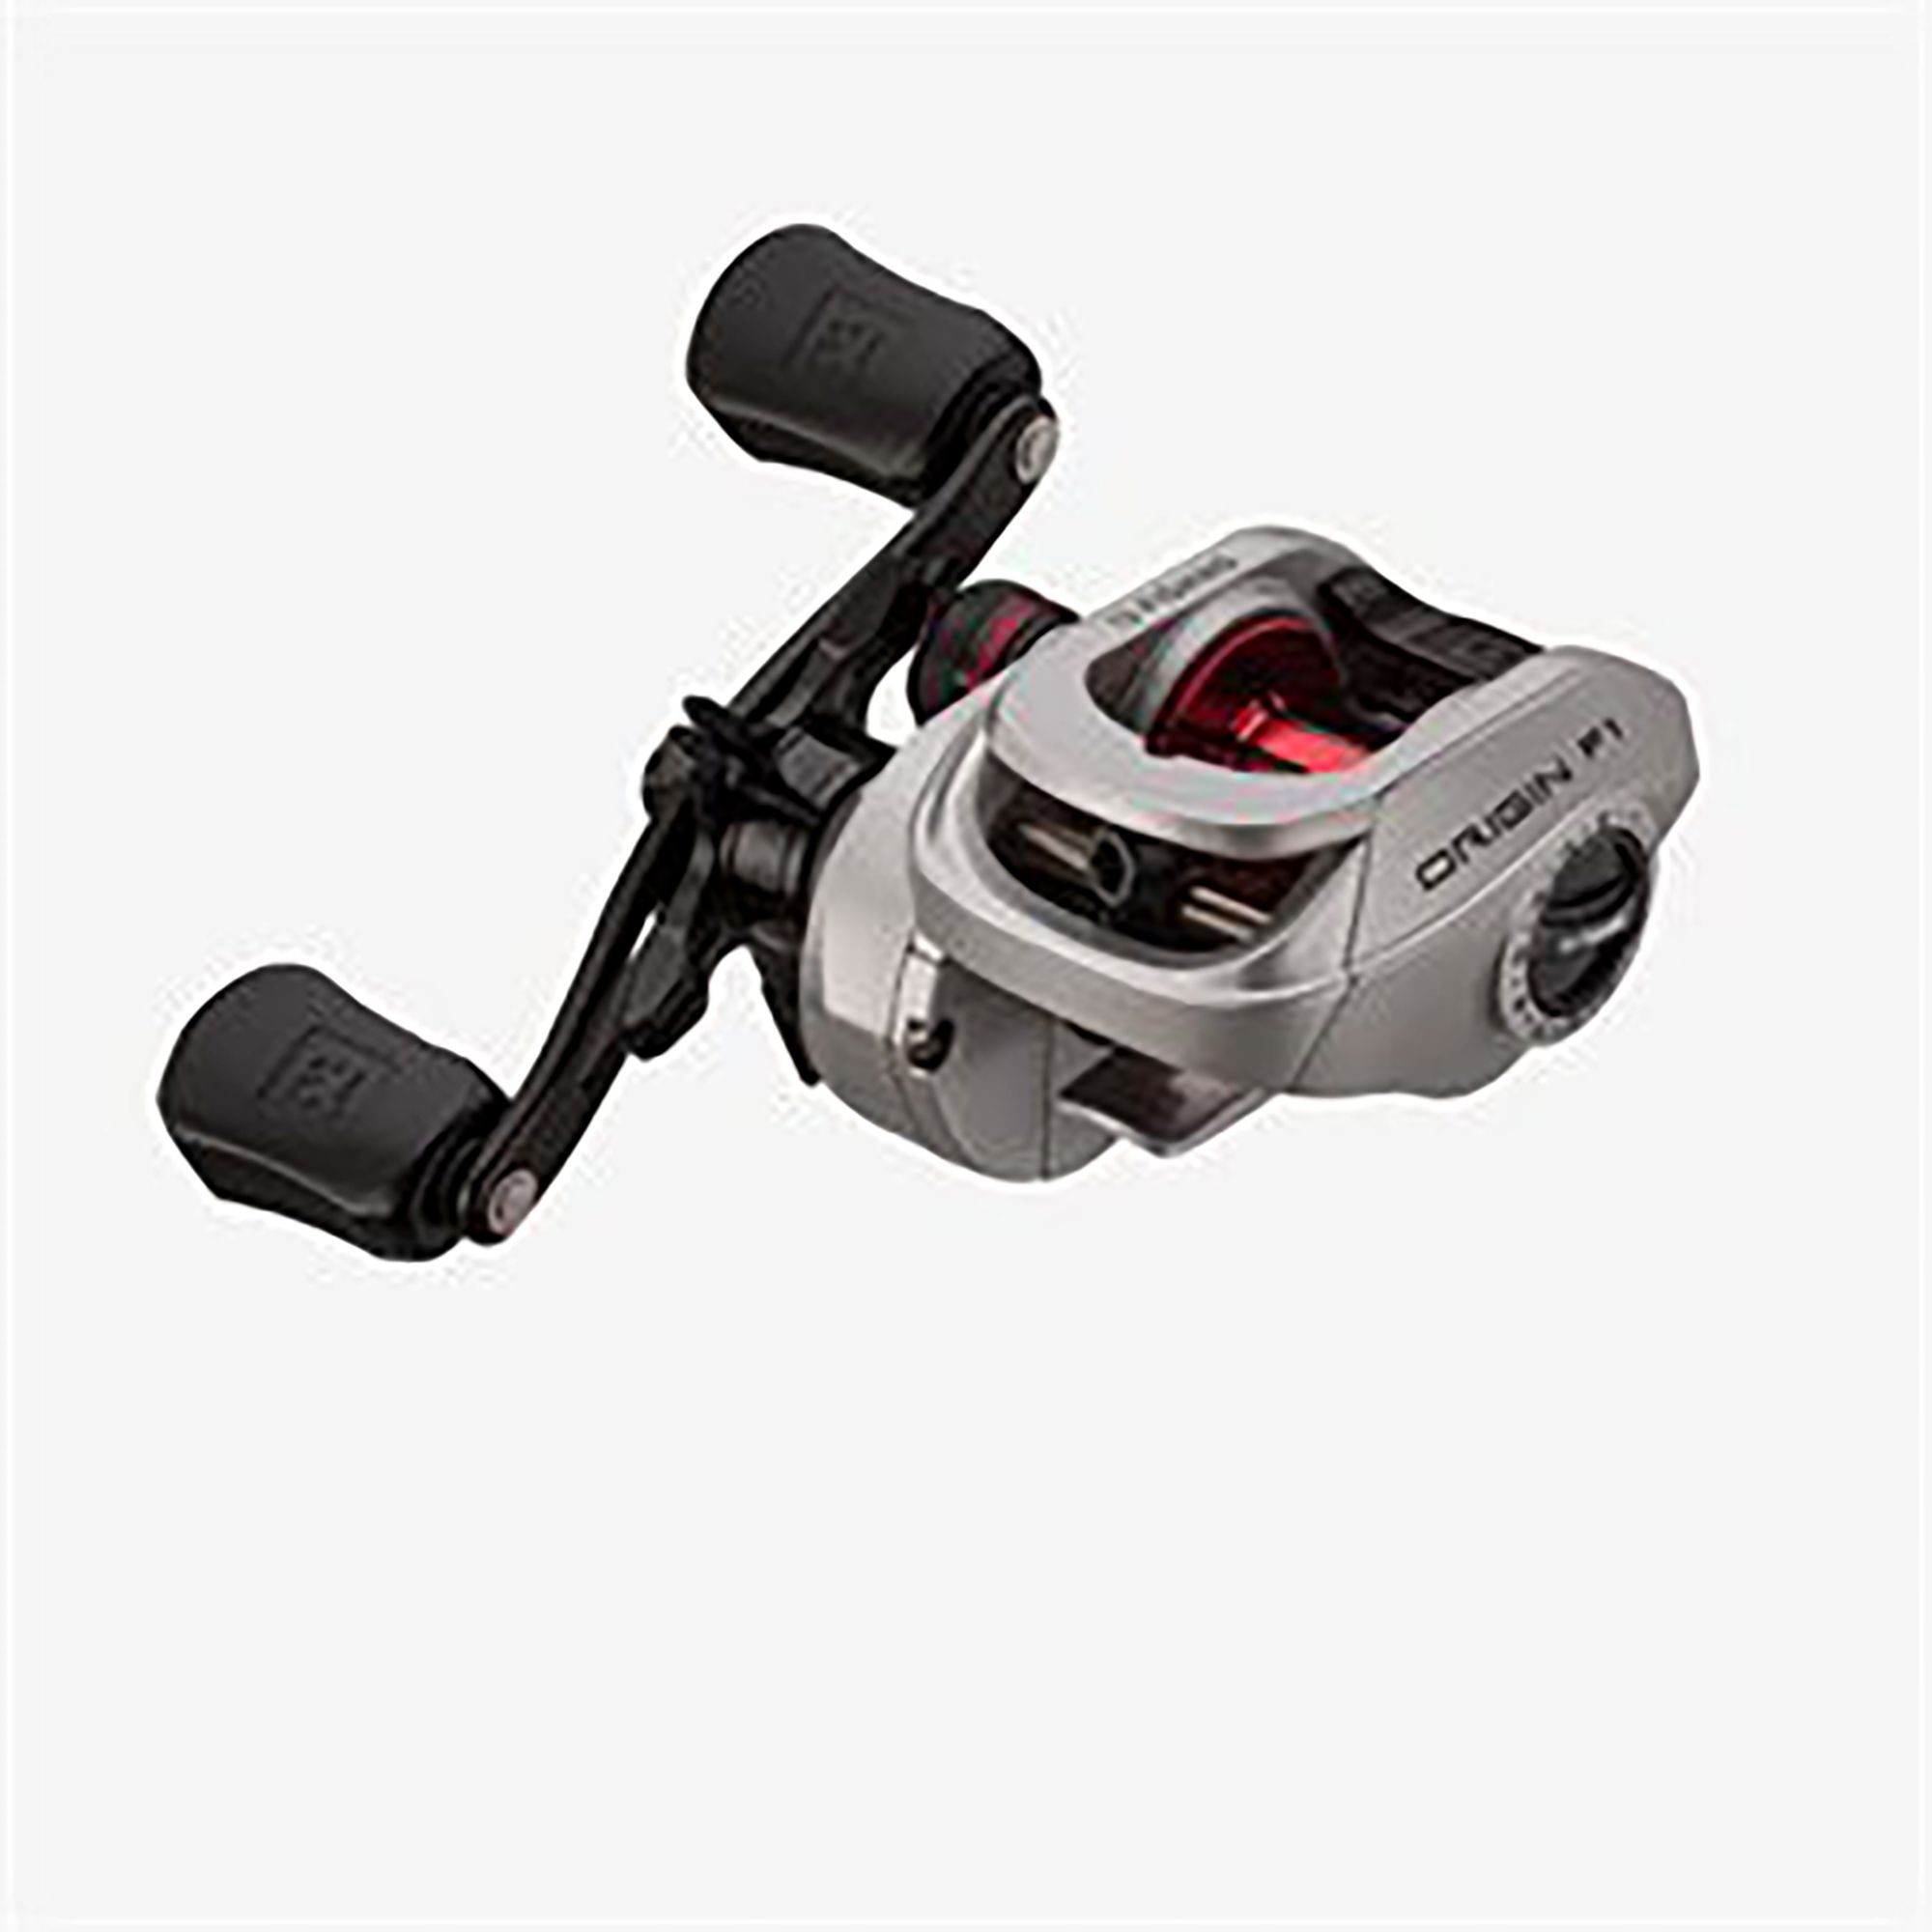 Photos - Other for Fishing 13 Fishing Origin F1 Baitcasting Reel 231FIURGNF1BCRLLHREE 